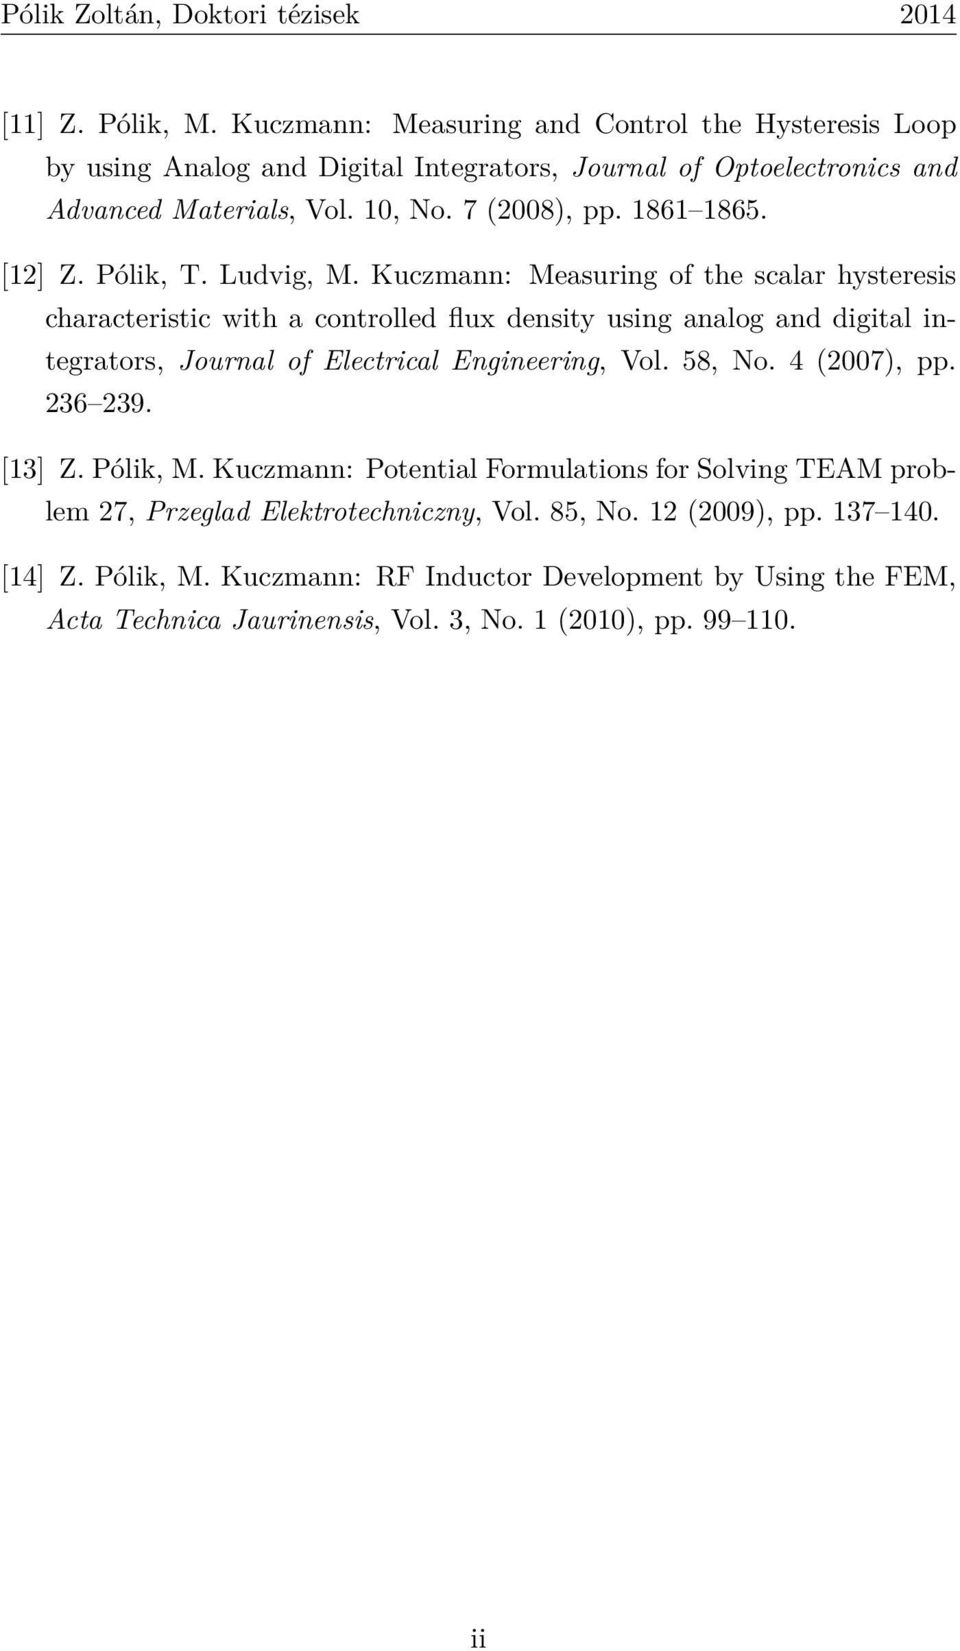 Kuczmann: Measuring of the scalar hysteresis characteristic with a controlled flux density using analog and digital integrators, Journal of Electrical Engineering, Vol. 58, No.